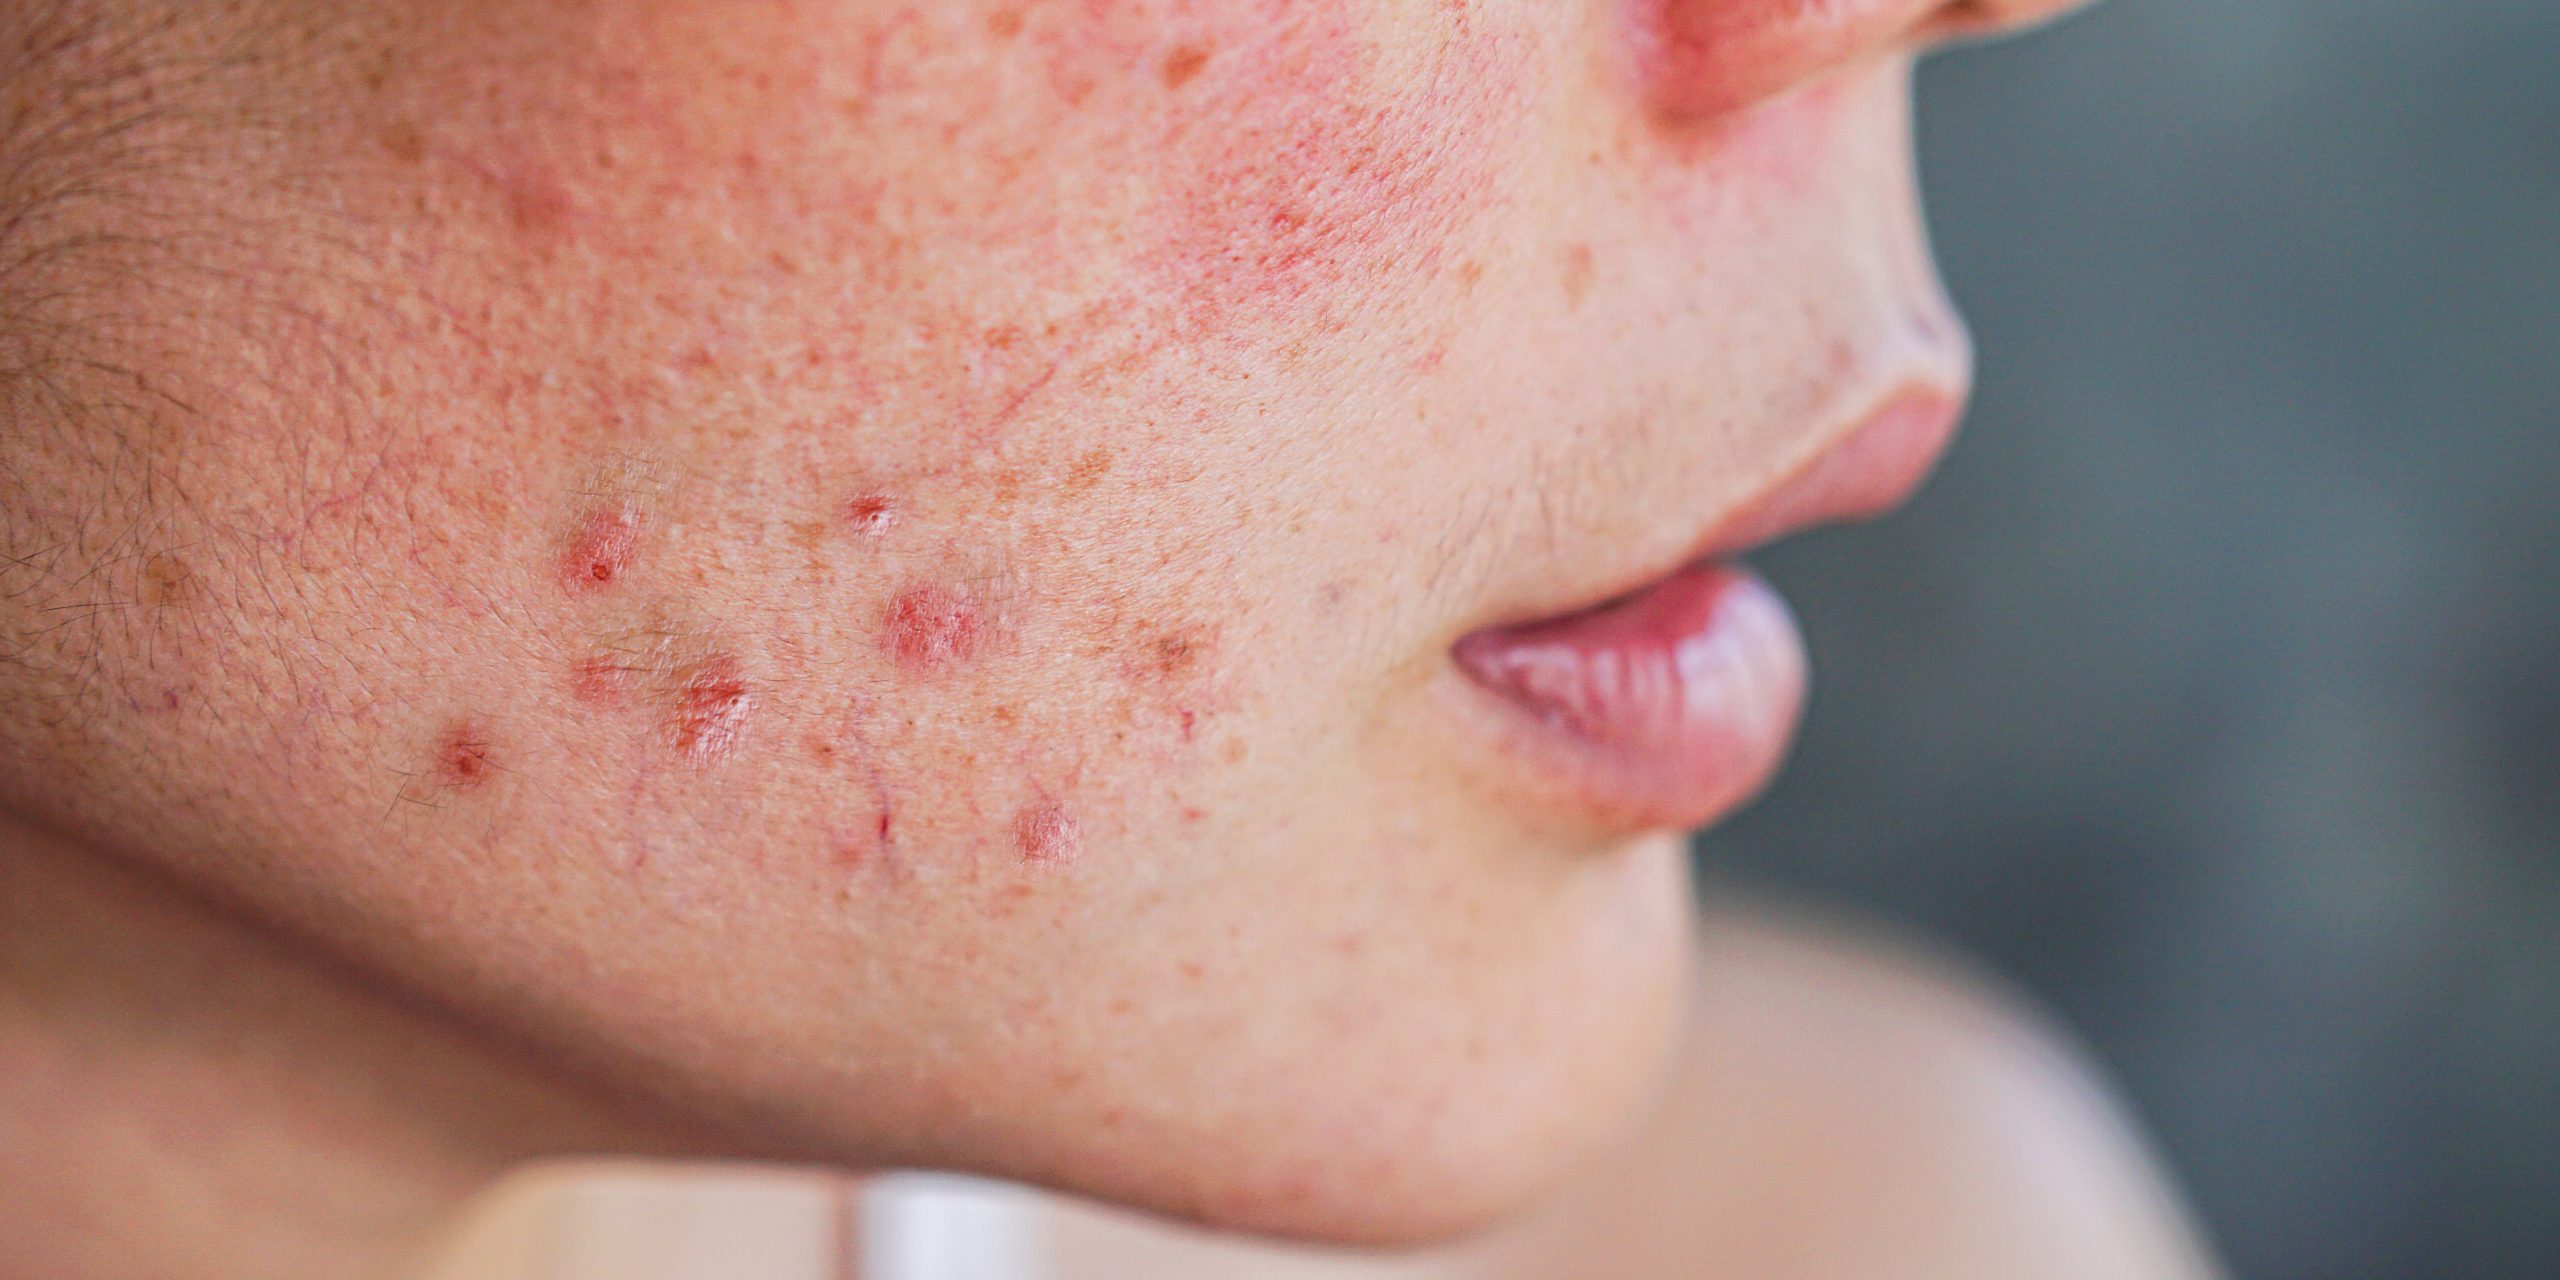 A close-up photo of acne on a person's cheek.